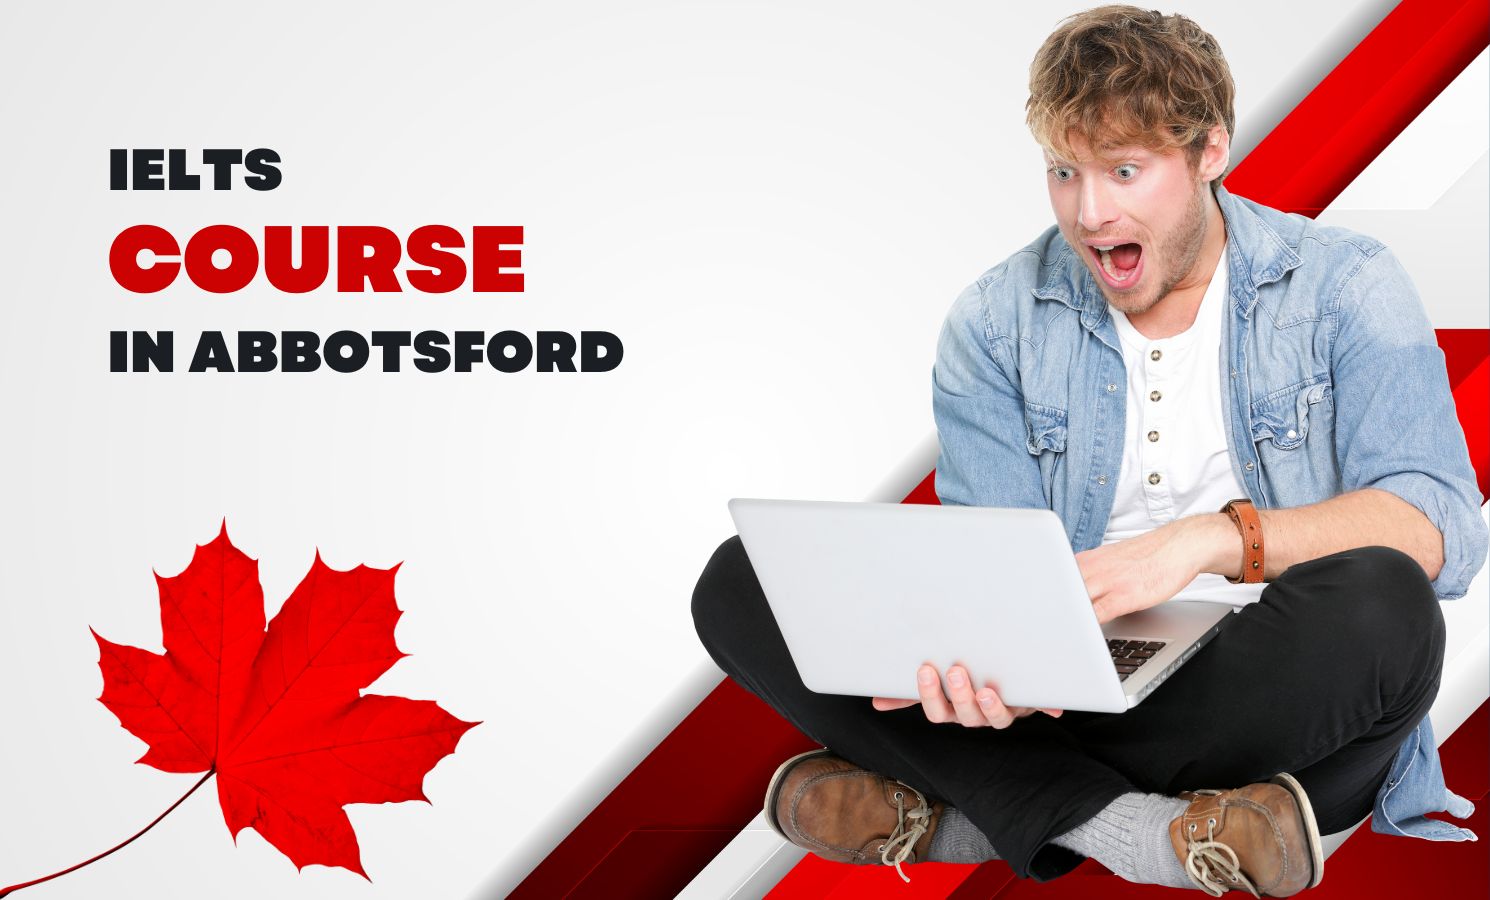 IELTS course in Abbotsford